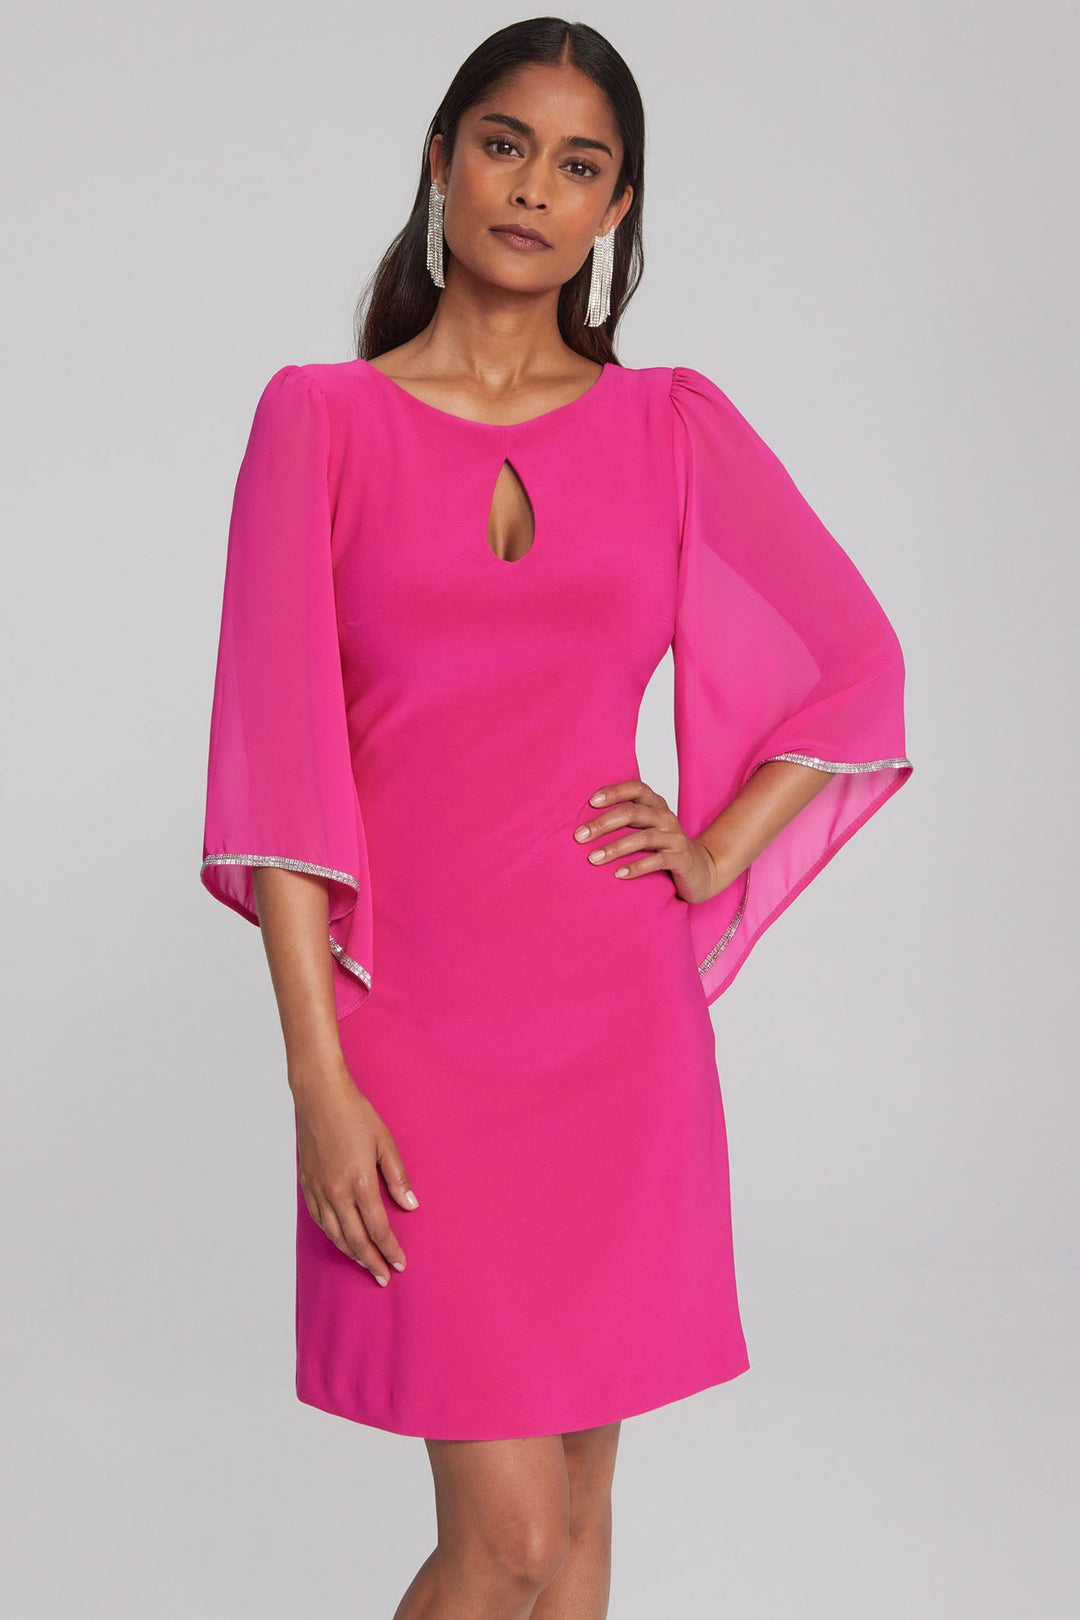 Joseph Ribkoff 241709 Shocking Pink Waterfall Sleeve Occasion Dress - Dotique Chesterfield